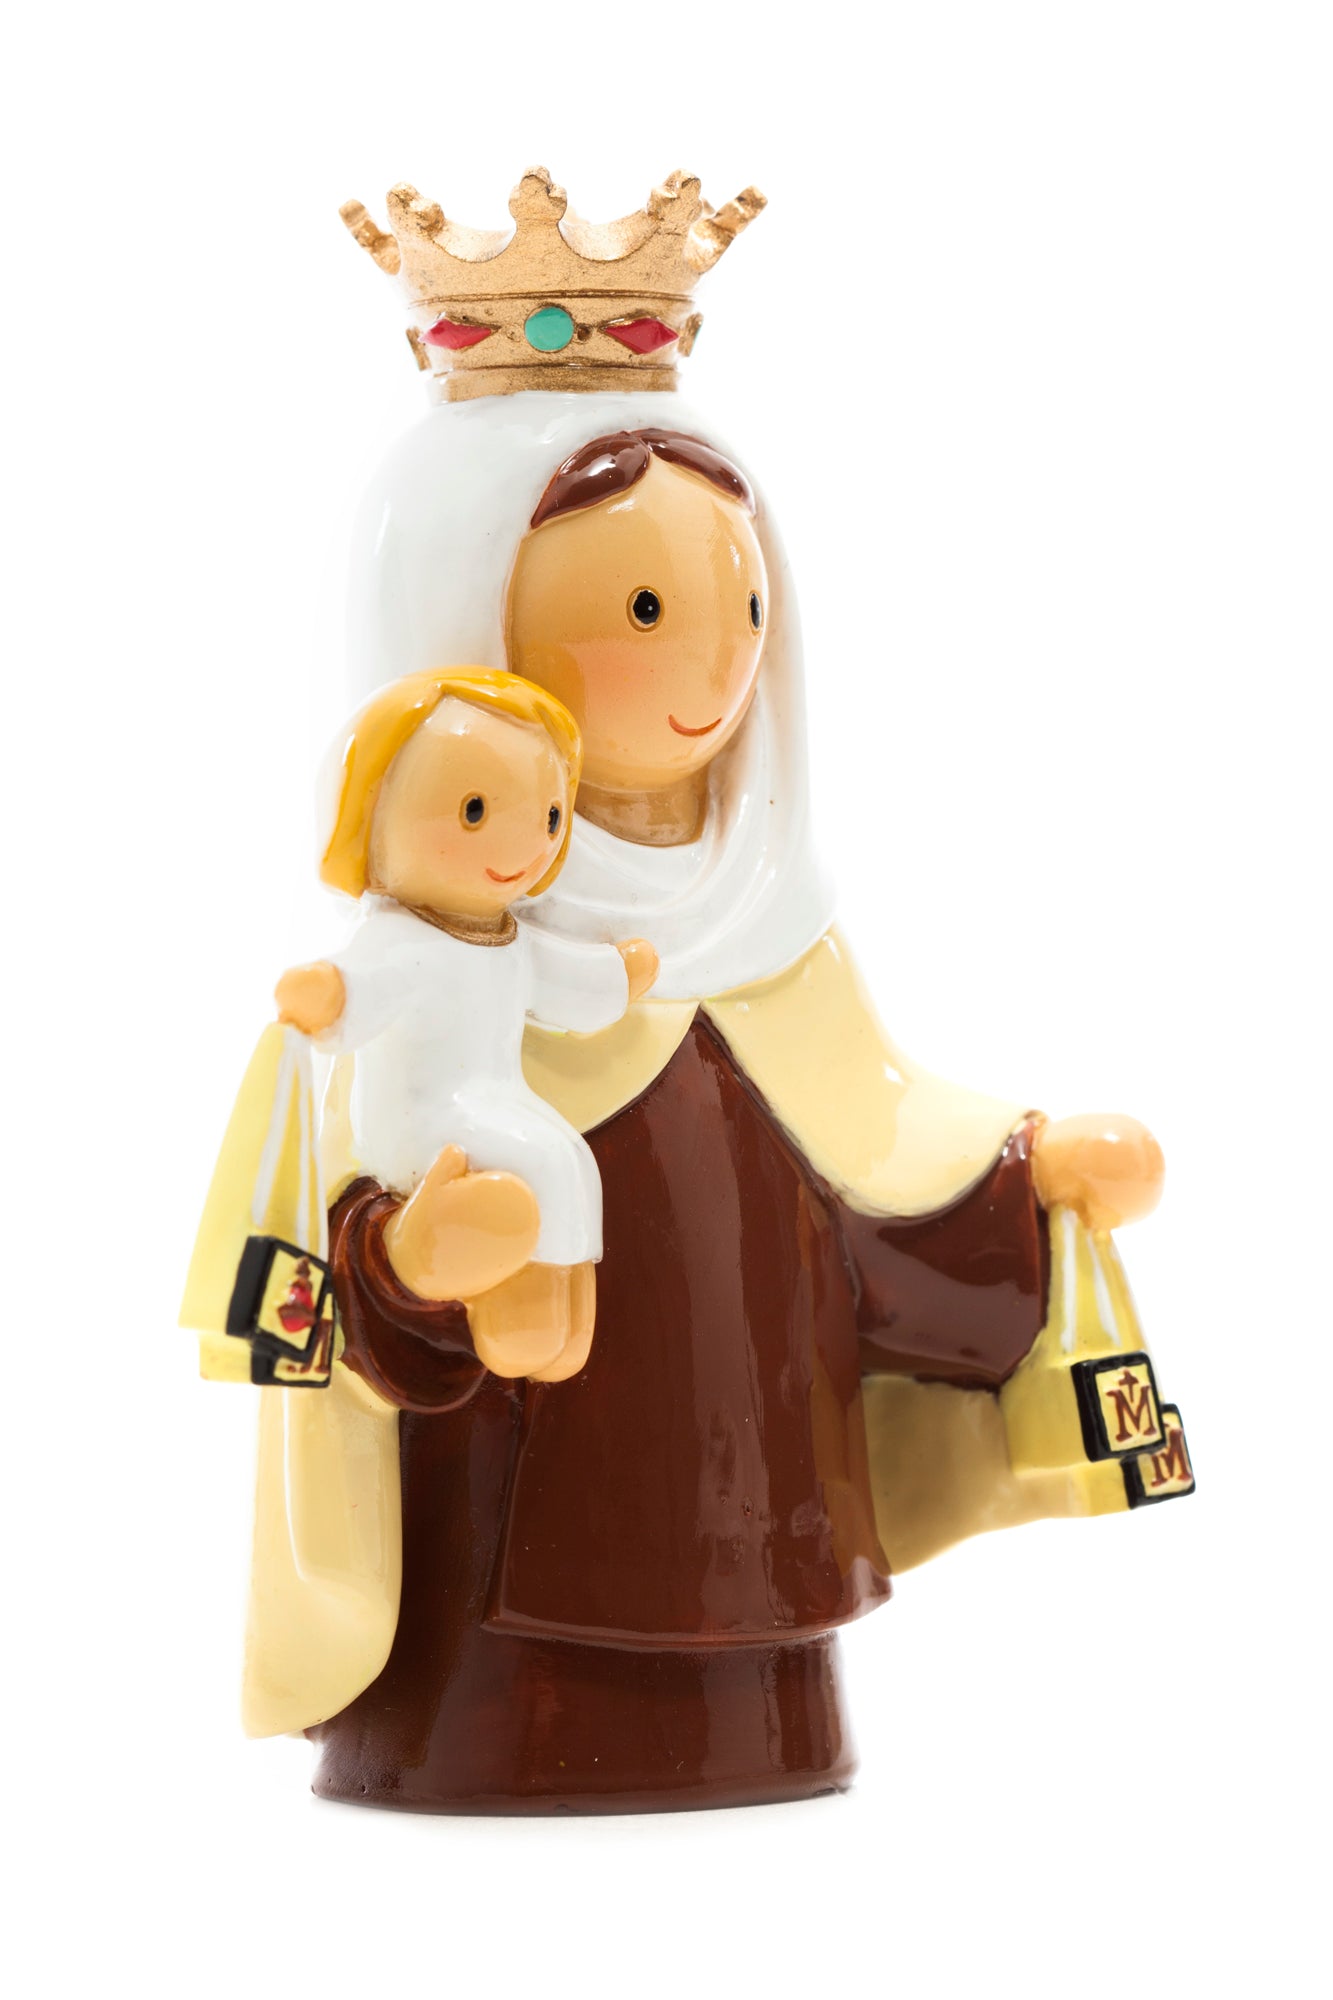 Our Lady of Mount Carmel statue